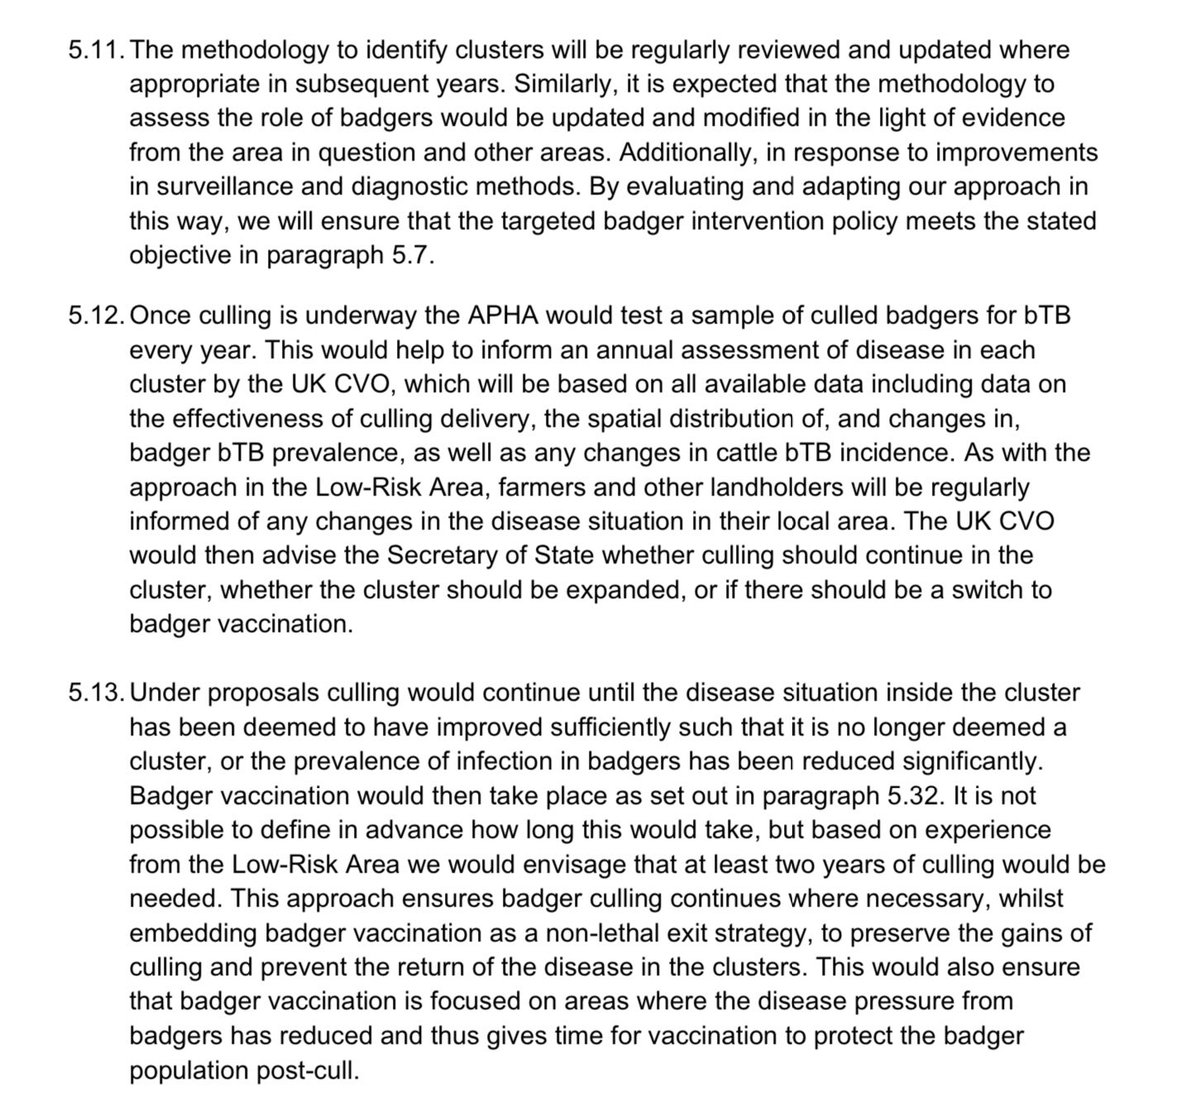 A lot of hyperbole on Twitter about #badgercull proposals.
It is worth reading what the proposals actually are, culling will only occur when backed up by genomic sampling, testing of badgers will continue during culling then the exit strategy of vaccination implemented….